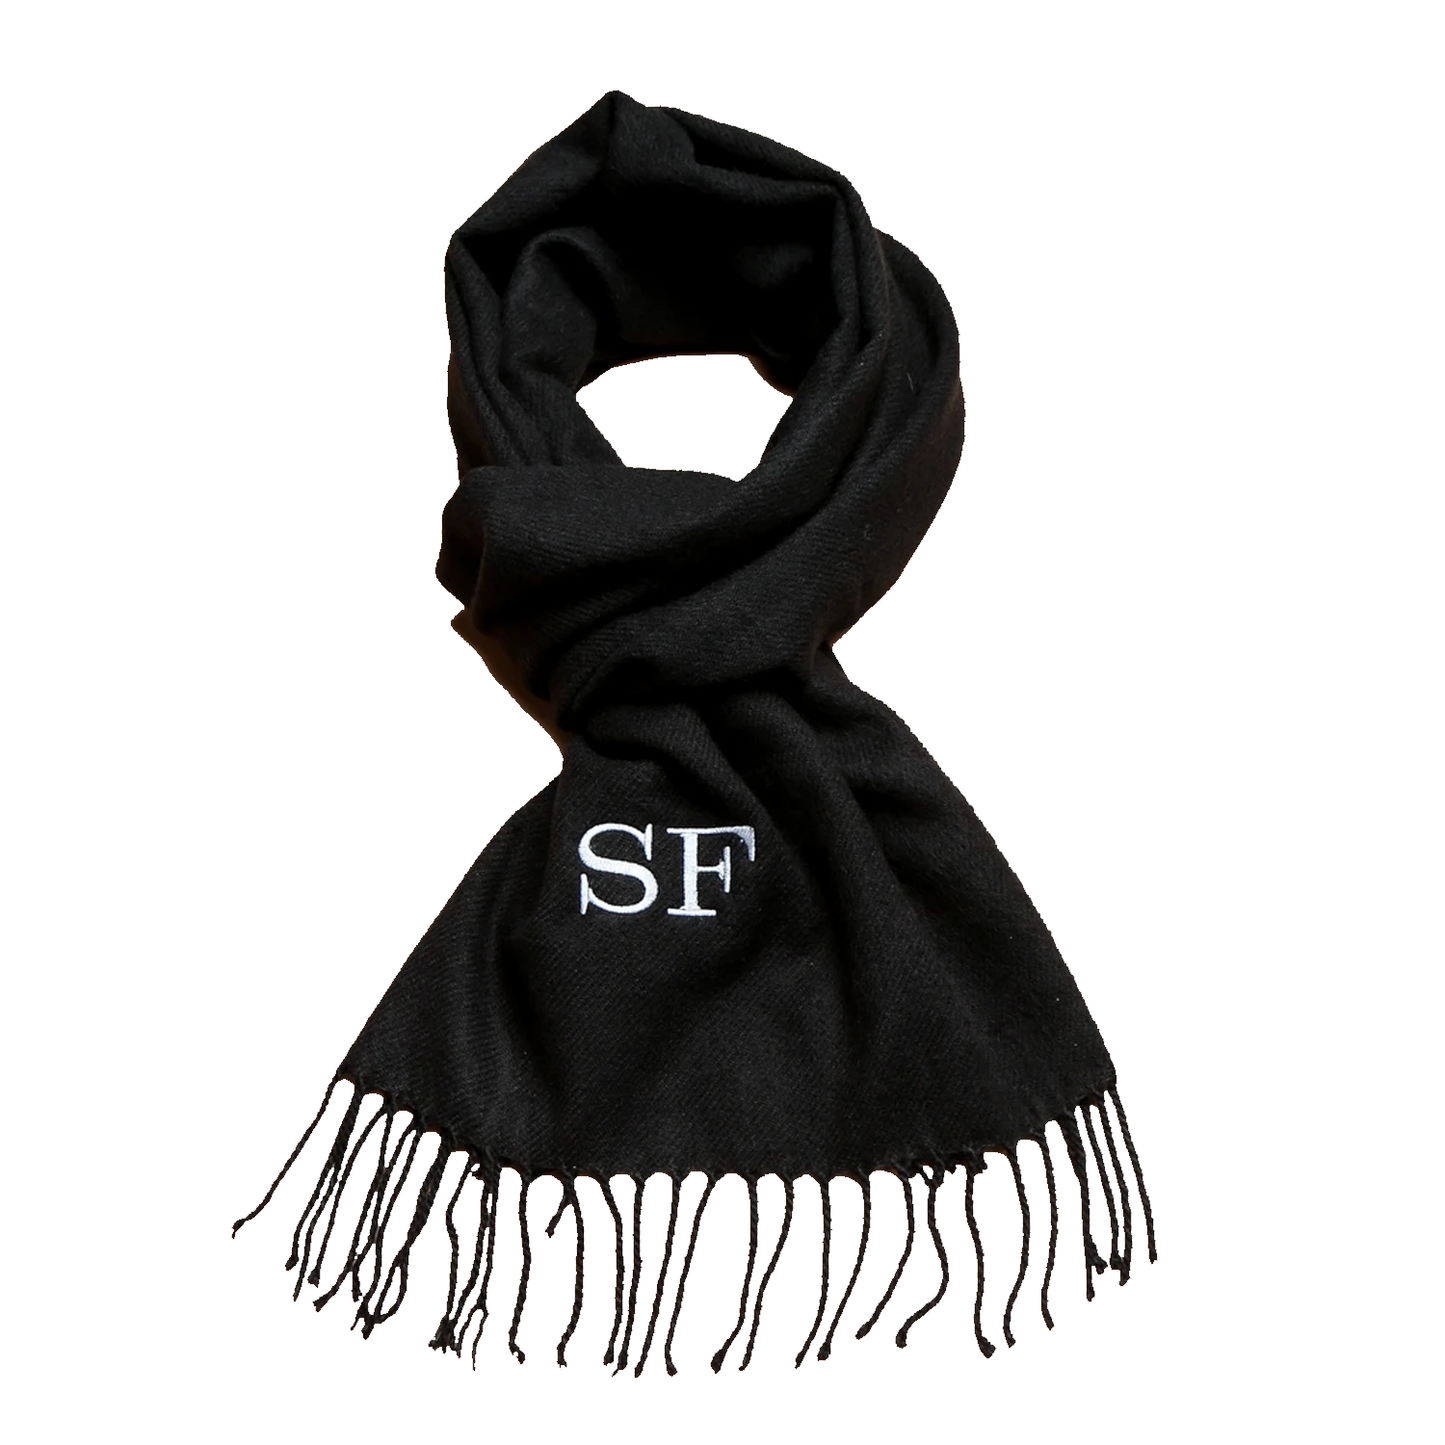 Personalised Embroidered Woven Scarf - 4 great colours to choose from!